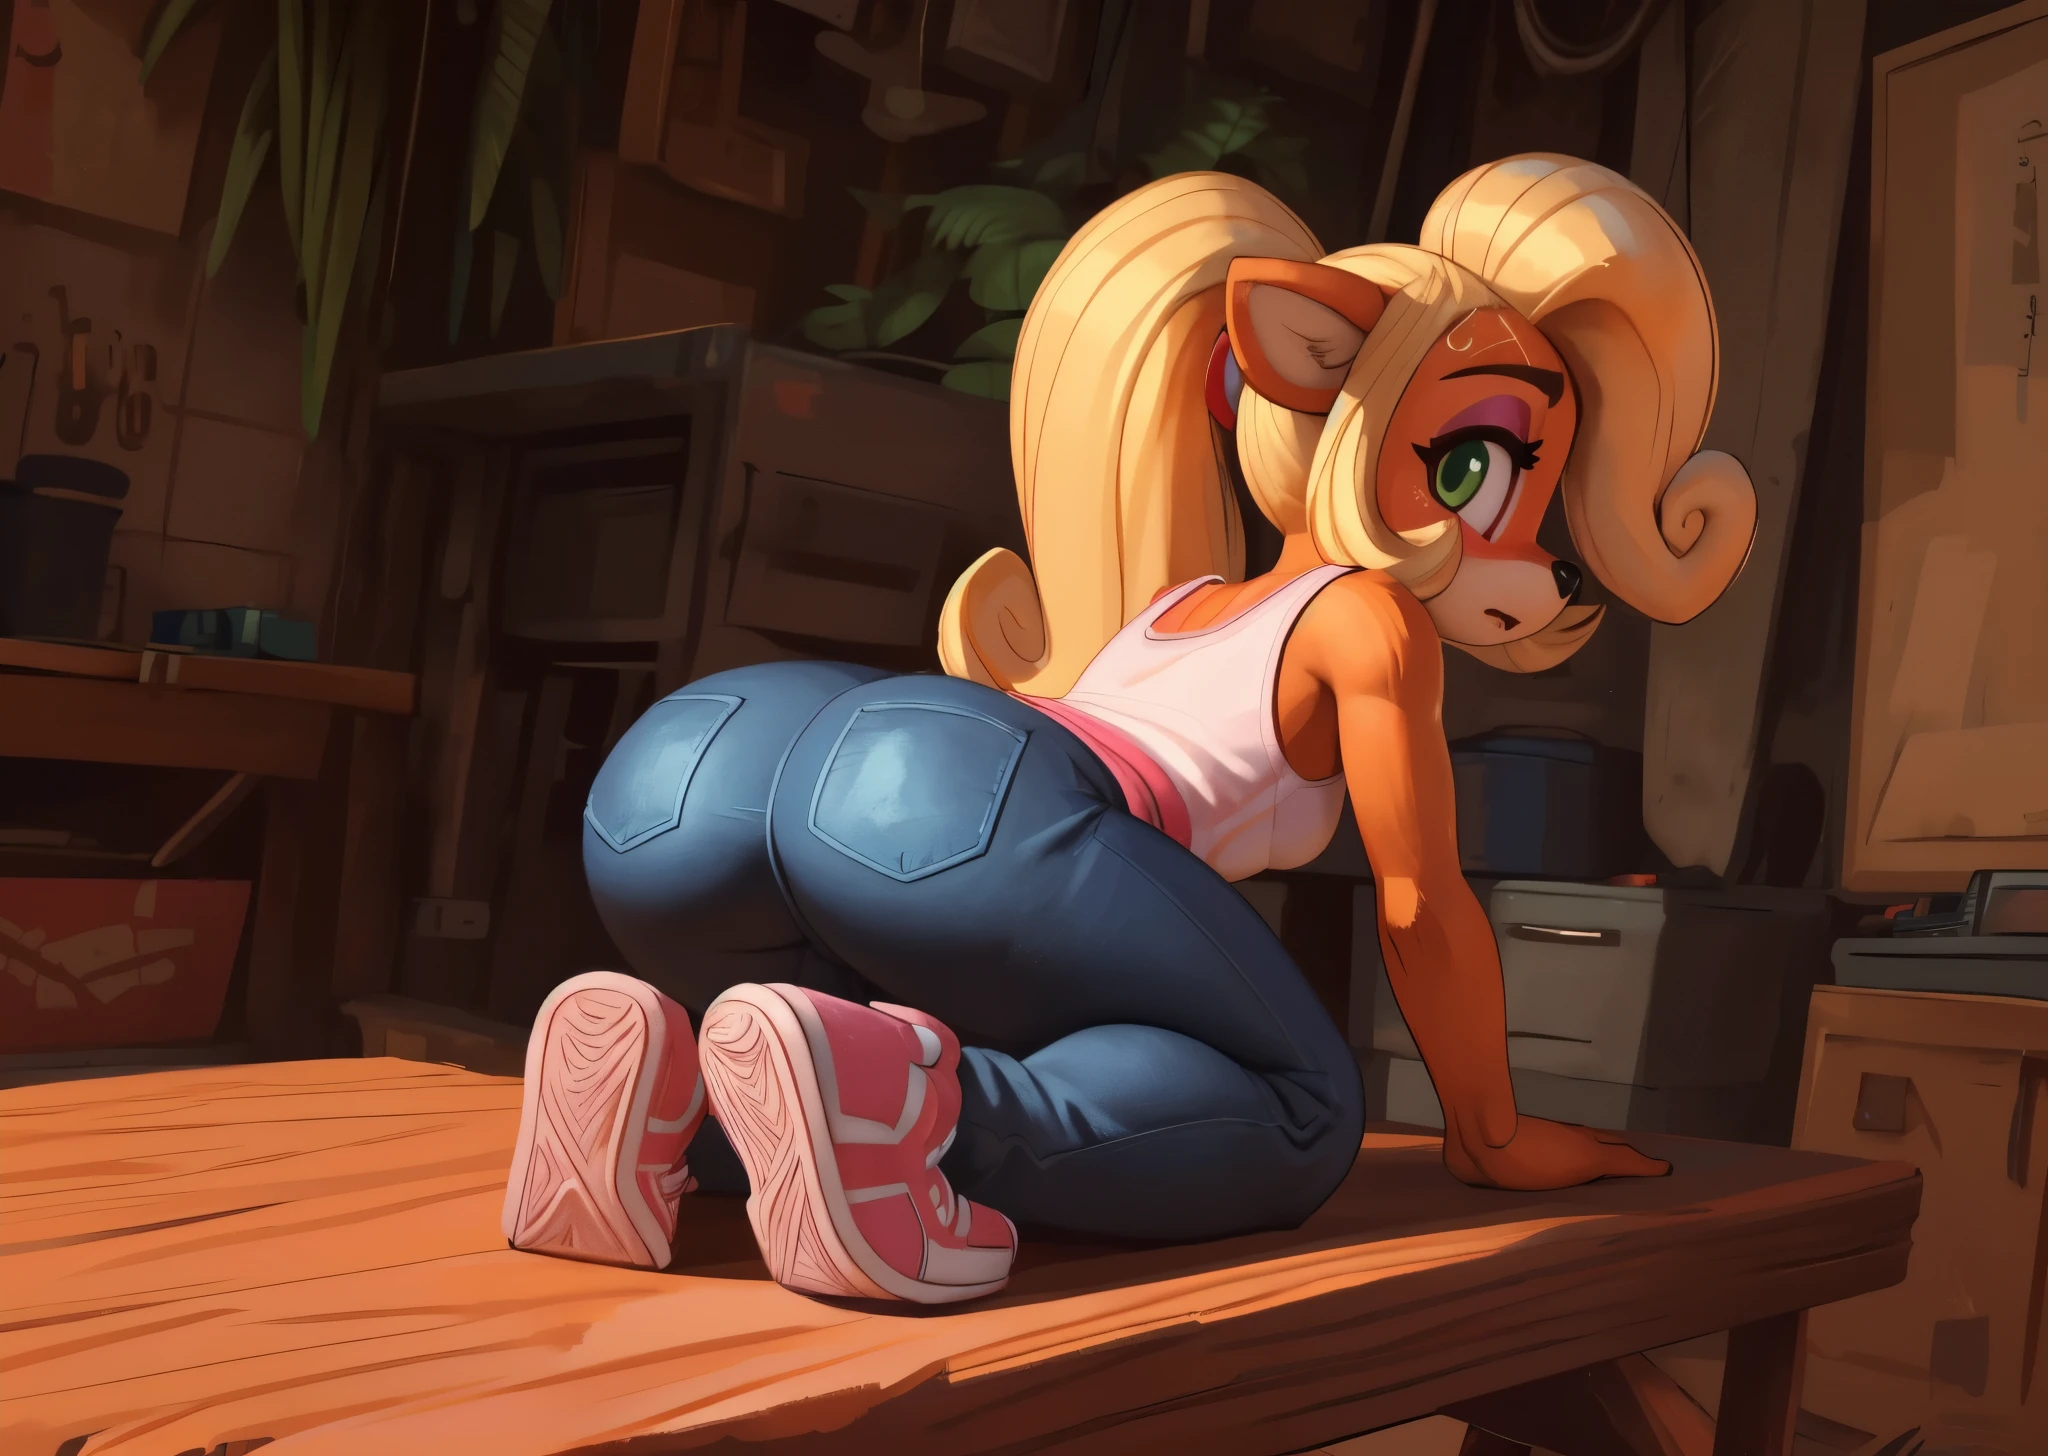 [Coco bandicoot], [Uploaded to e621.net; (Pixelsketcher), (wamudraws)], ((masterpiece)), ((HD)), ((solo portrait)), ((full body)), ((back view)), ((feet visible)), ((furry; anthro)), ((detailed fur)), ((detailed shading)), ((beautiful render art)), ((intricate details)), {anthro; orange fur, black nose, (cute green eyes), (short eyelashes), (pink eyeshadow), (long blonde curly hair), (curvy hips), (detailed back), (beautiful legs), (blushing), (sweat on forehead), (surprised expression)}, {(white tank top pink lining), (butt-crack), (tight jeans), (pink sneakers)}, {(all fours), (bending over), (looking back), (looking at viewer)}, [background; (tropical forest), (garage), (workbench), (blue sky), (ambient lighting)]